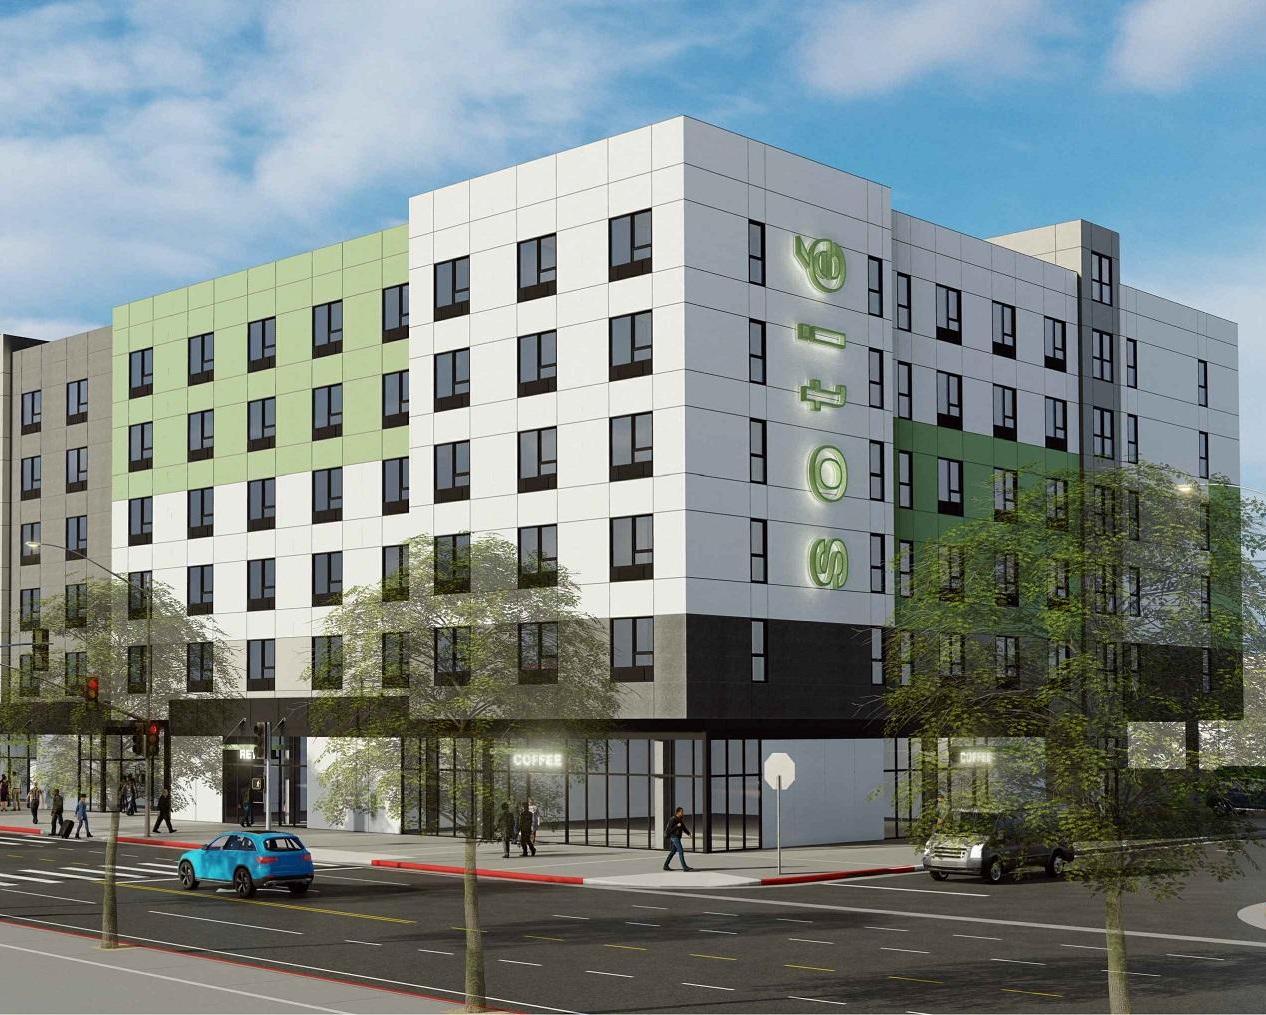 Former Industrial Site Being Transformed into 376-Unit Affordable and Workforce Apartment Community to Meet Demand in Los Angeles